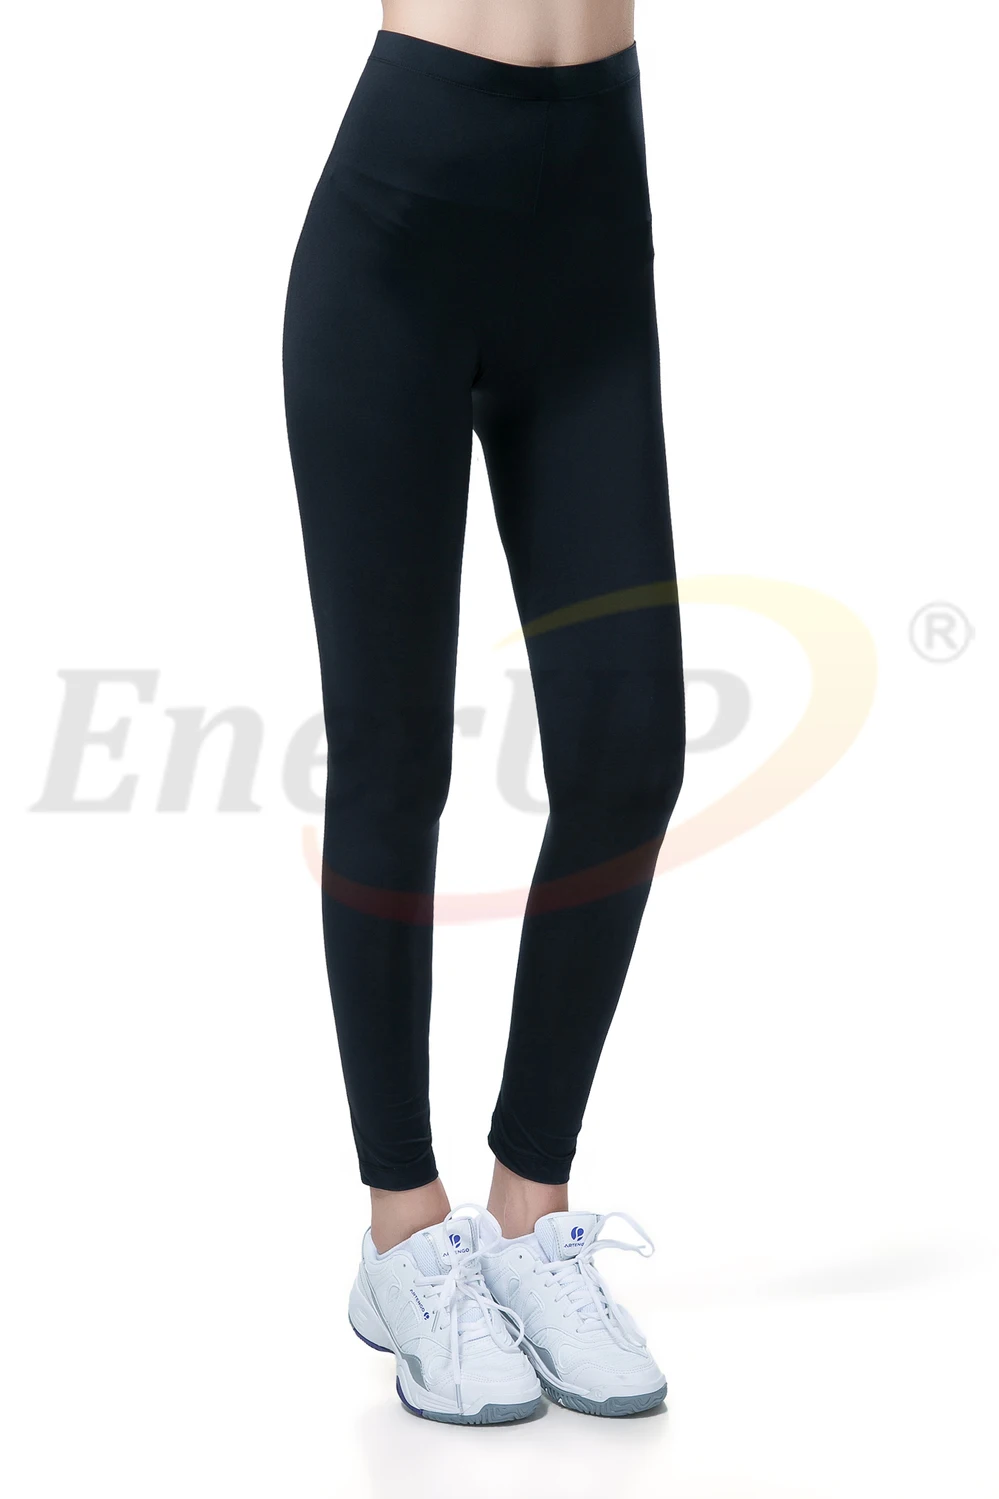 Popular Items Supply young mens copper compression underwear jogger pants